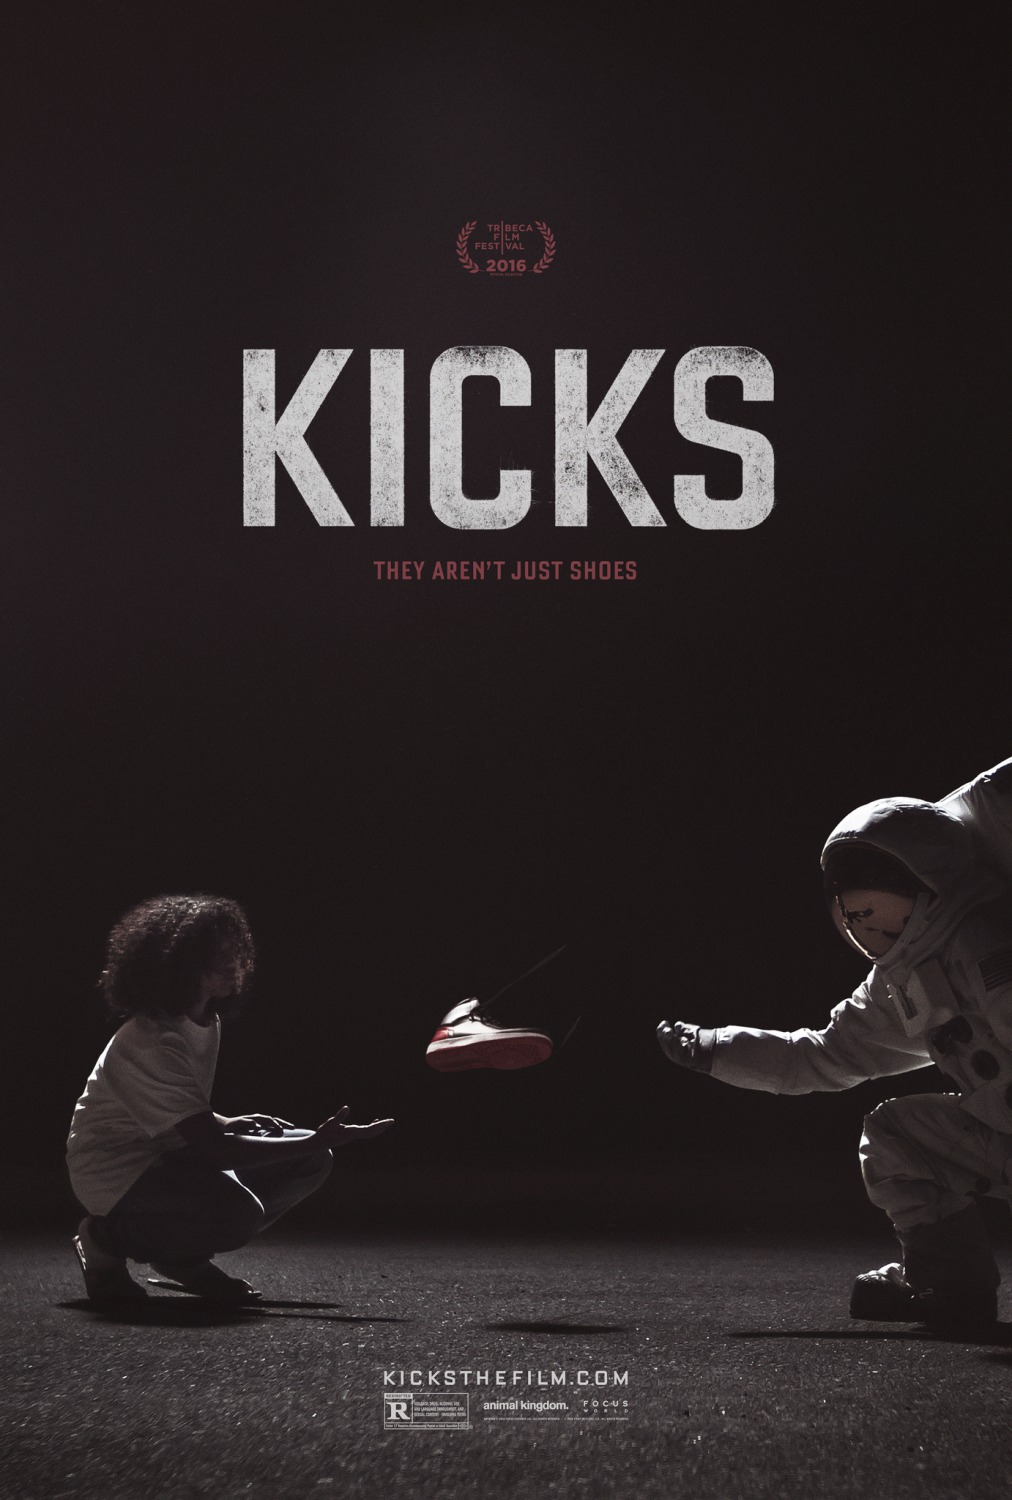 ‘Kicks’ (@kicksfilm) Is the Must-See Film for This Generation!